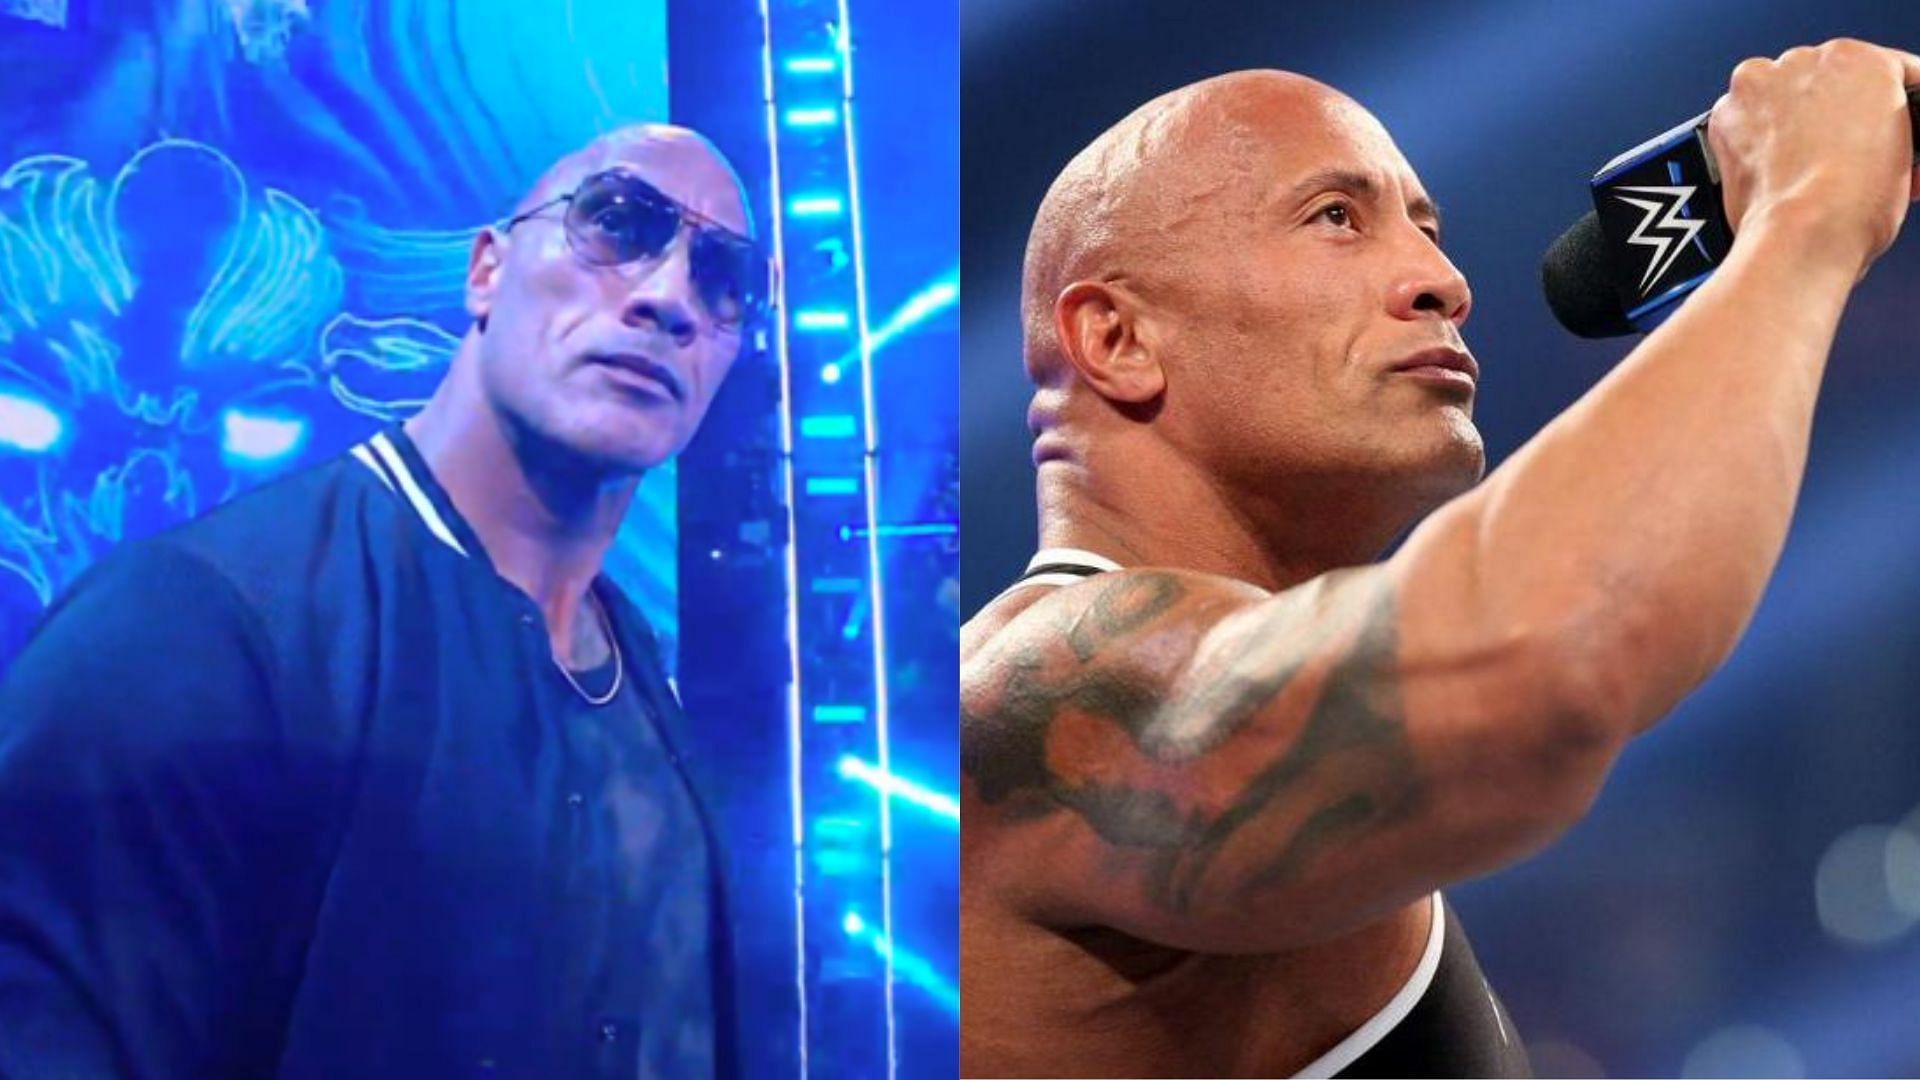 The Rock made a surprise appearance on SmackDown